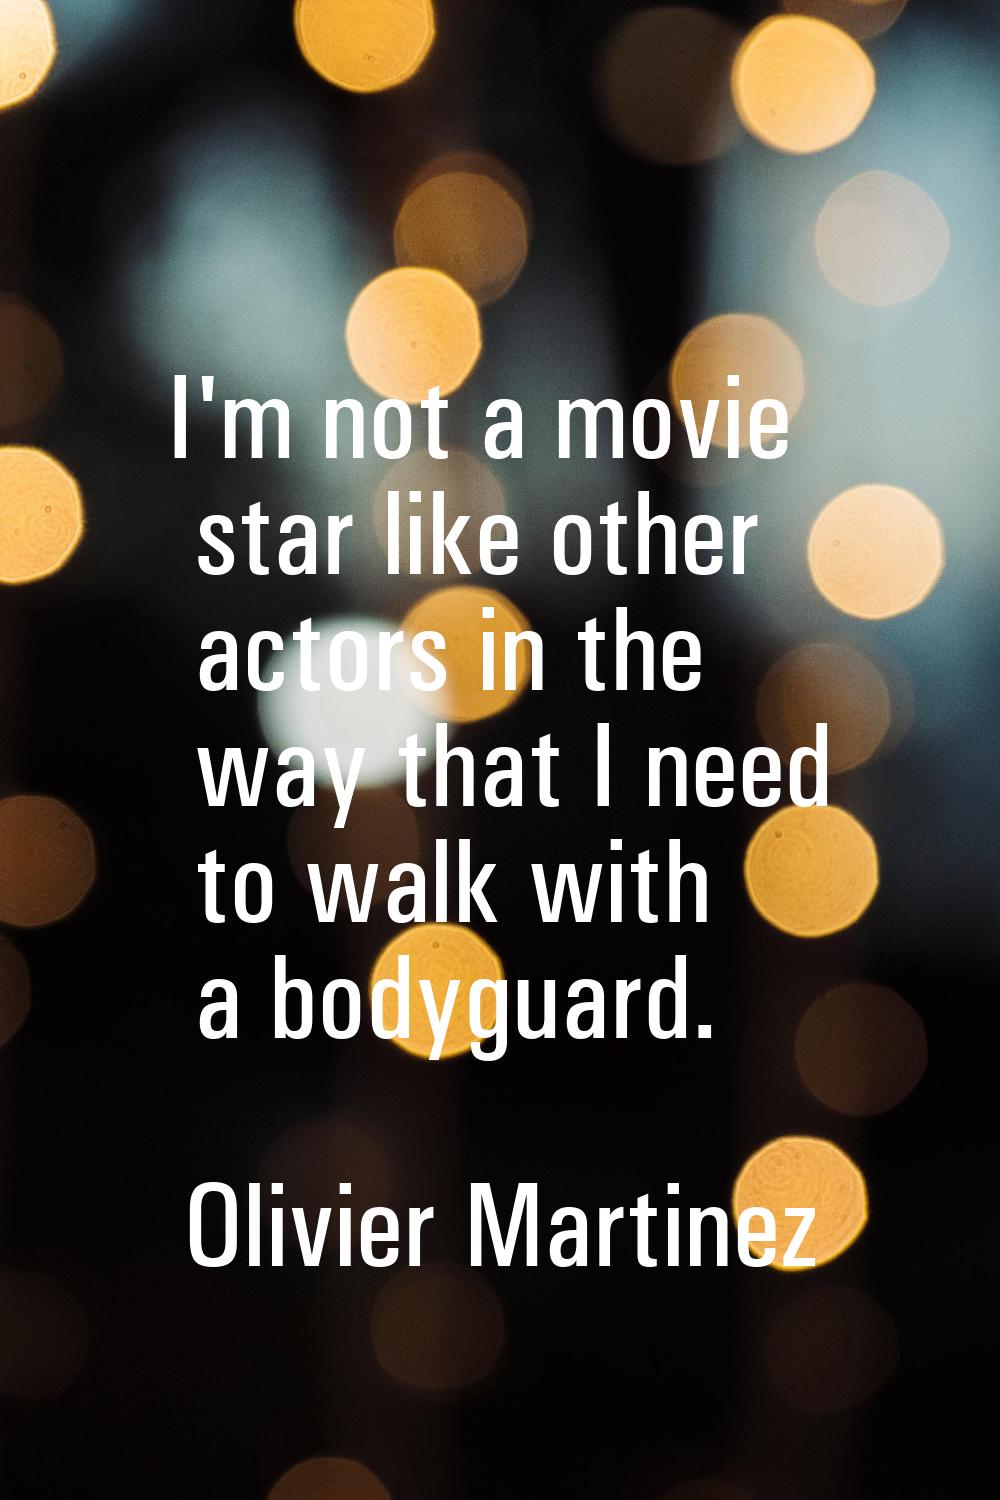 I'm not a movie star like other actors in the way that I need to walk with a bodyguard.